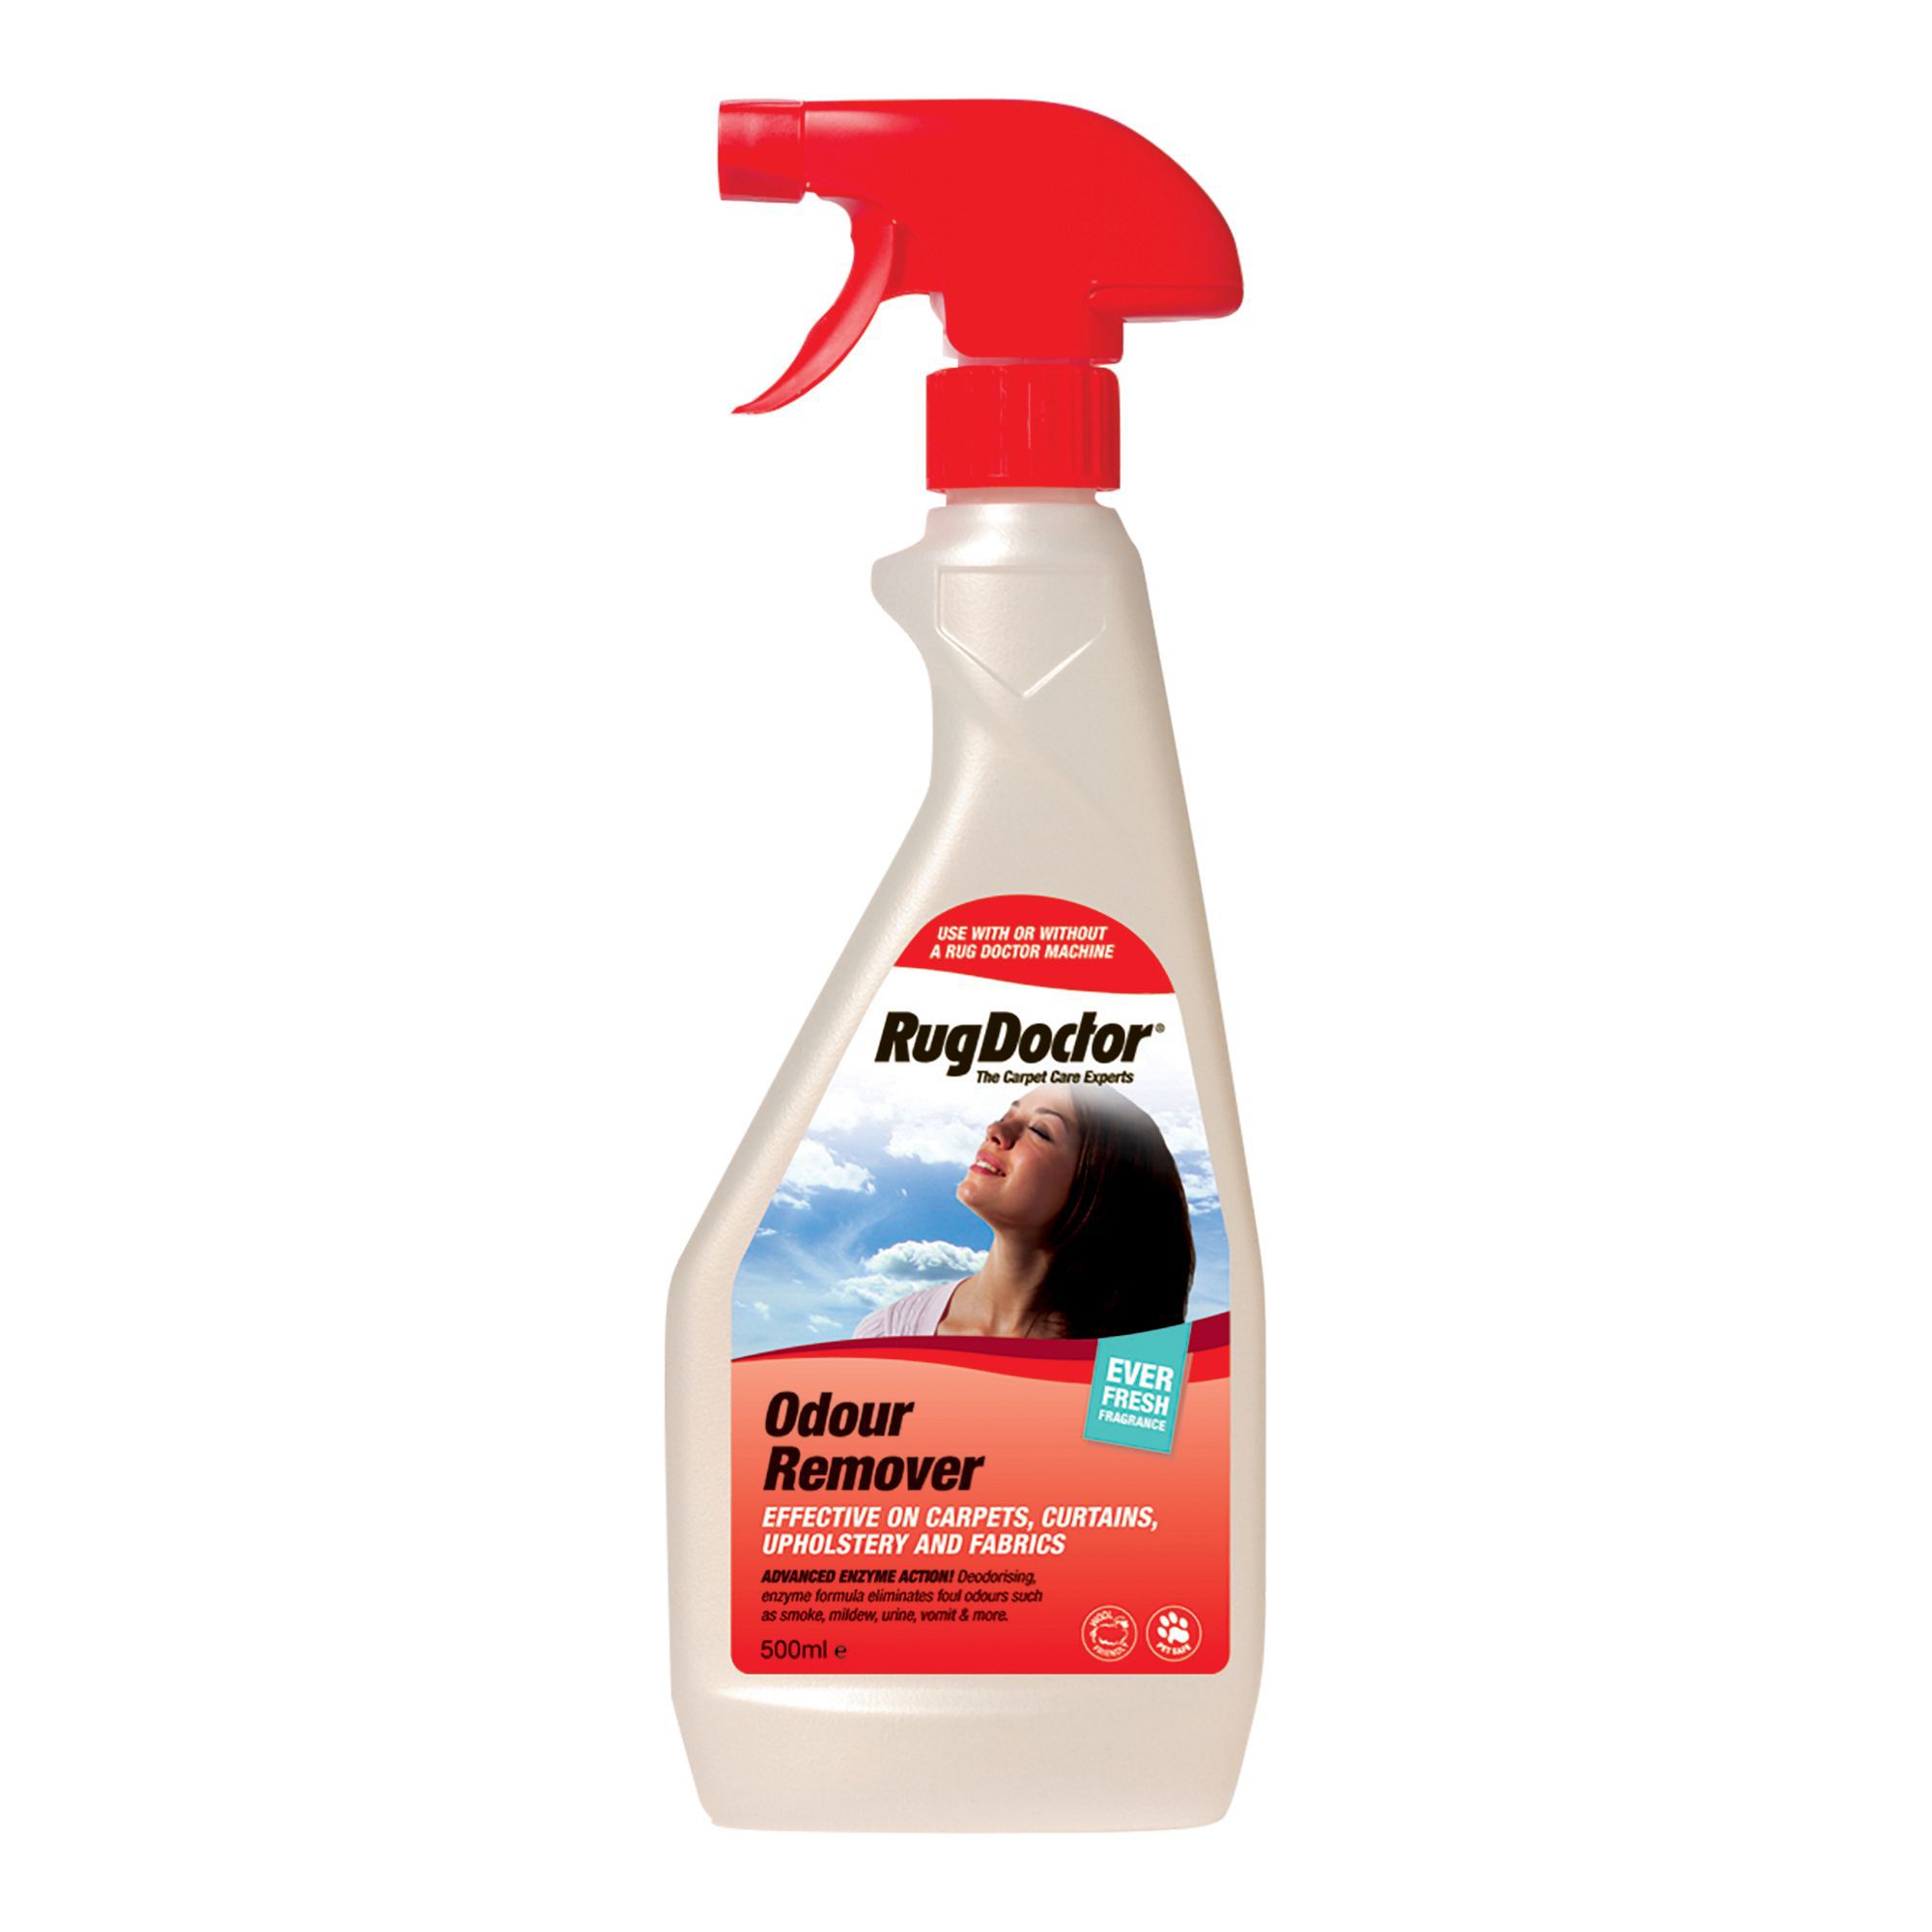 Rug Doctor Odour remover